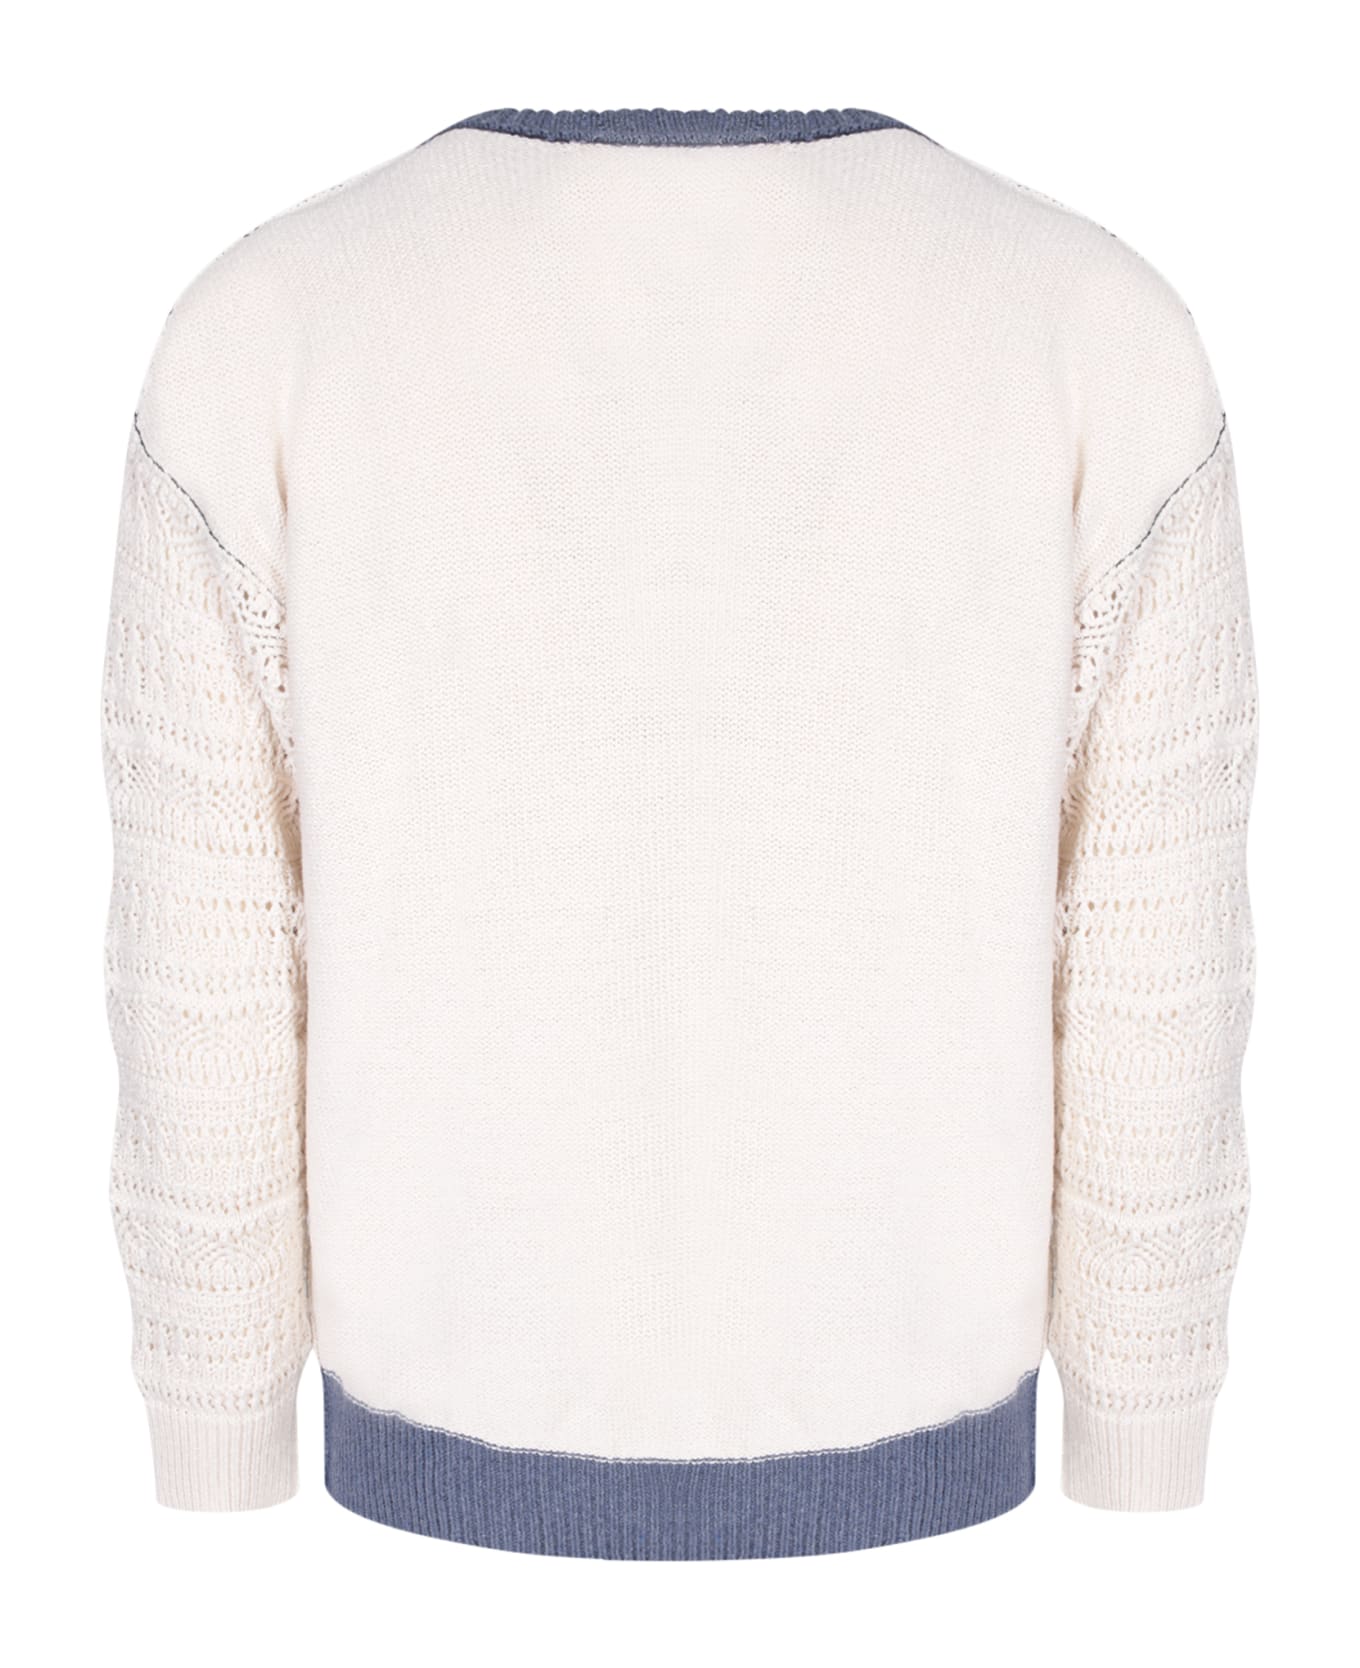 Atomo Factory Blue Cream Cut Out Sweater With Rhombuses - White